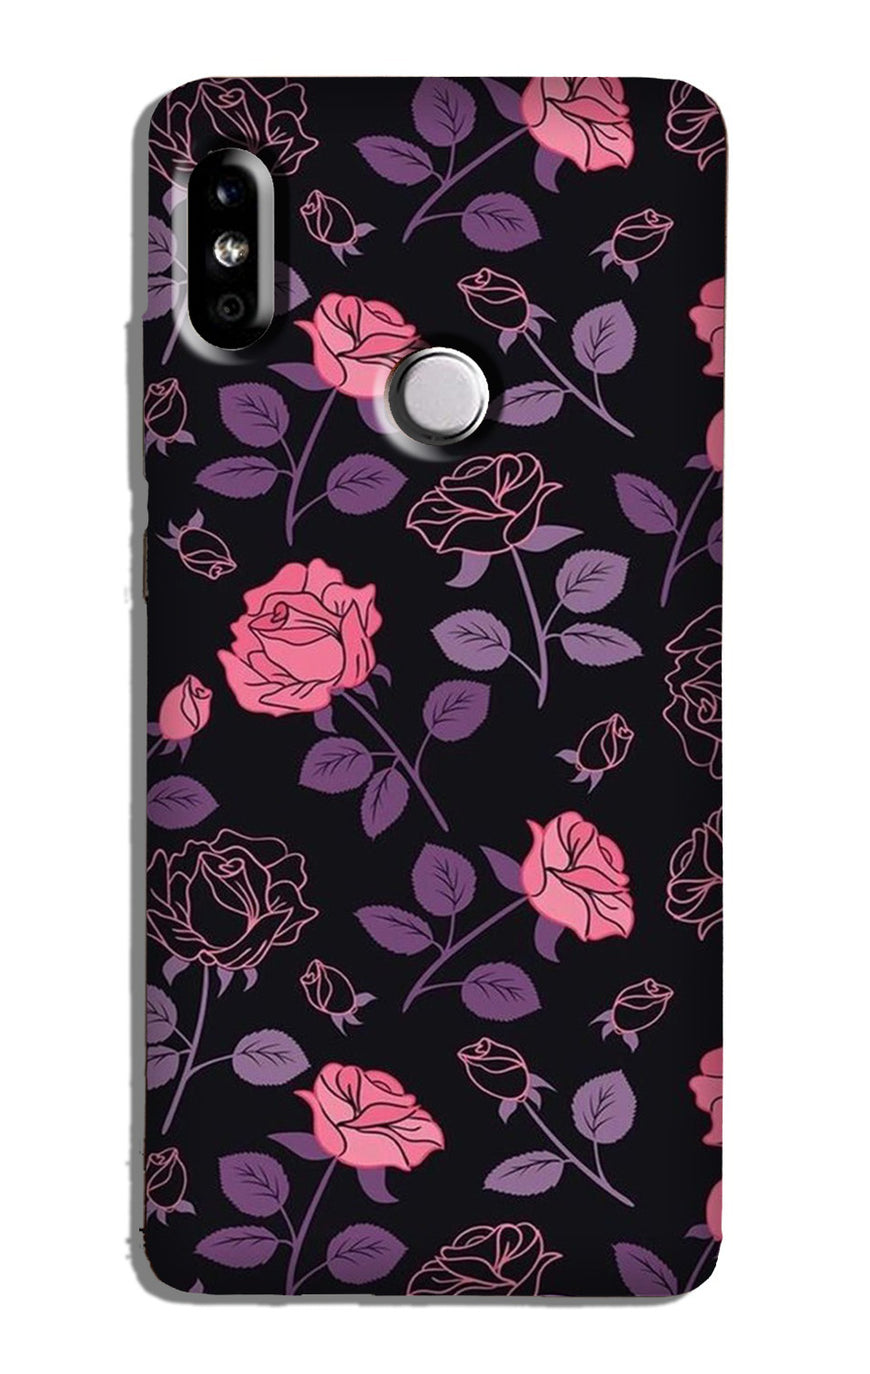 Rose Pattern Case for Redmi 6 Pro